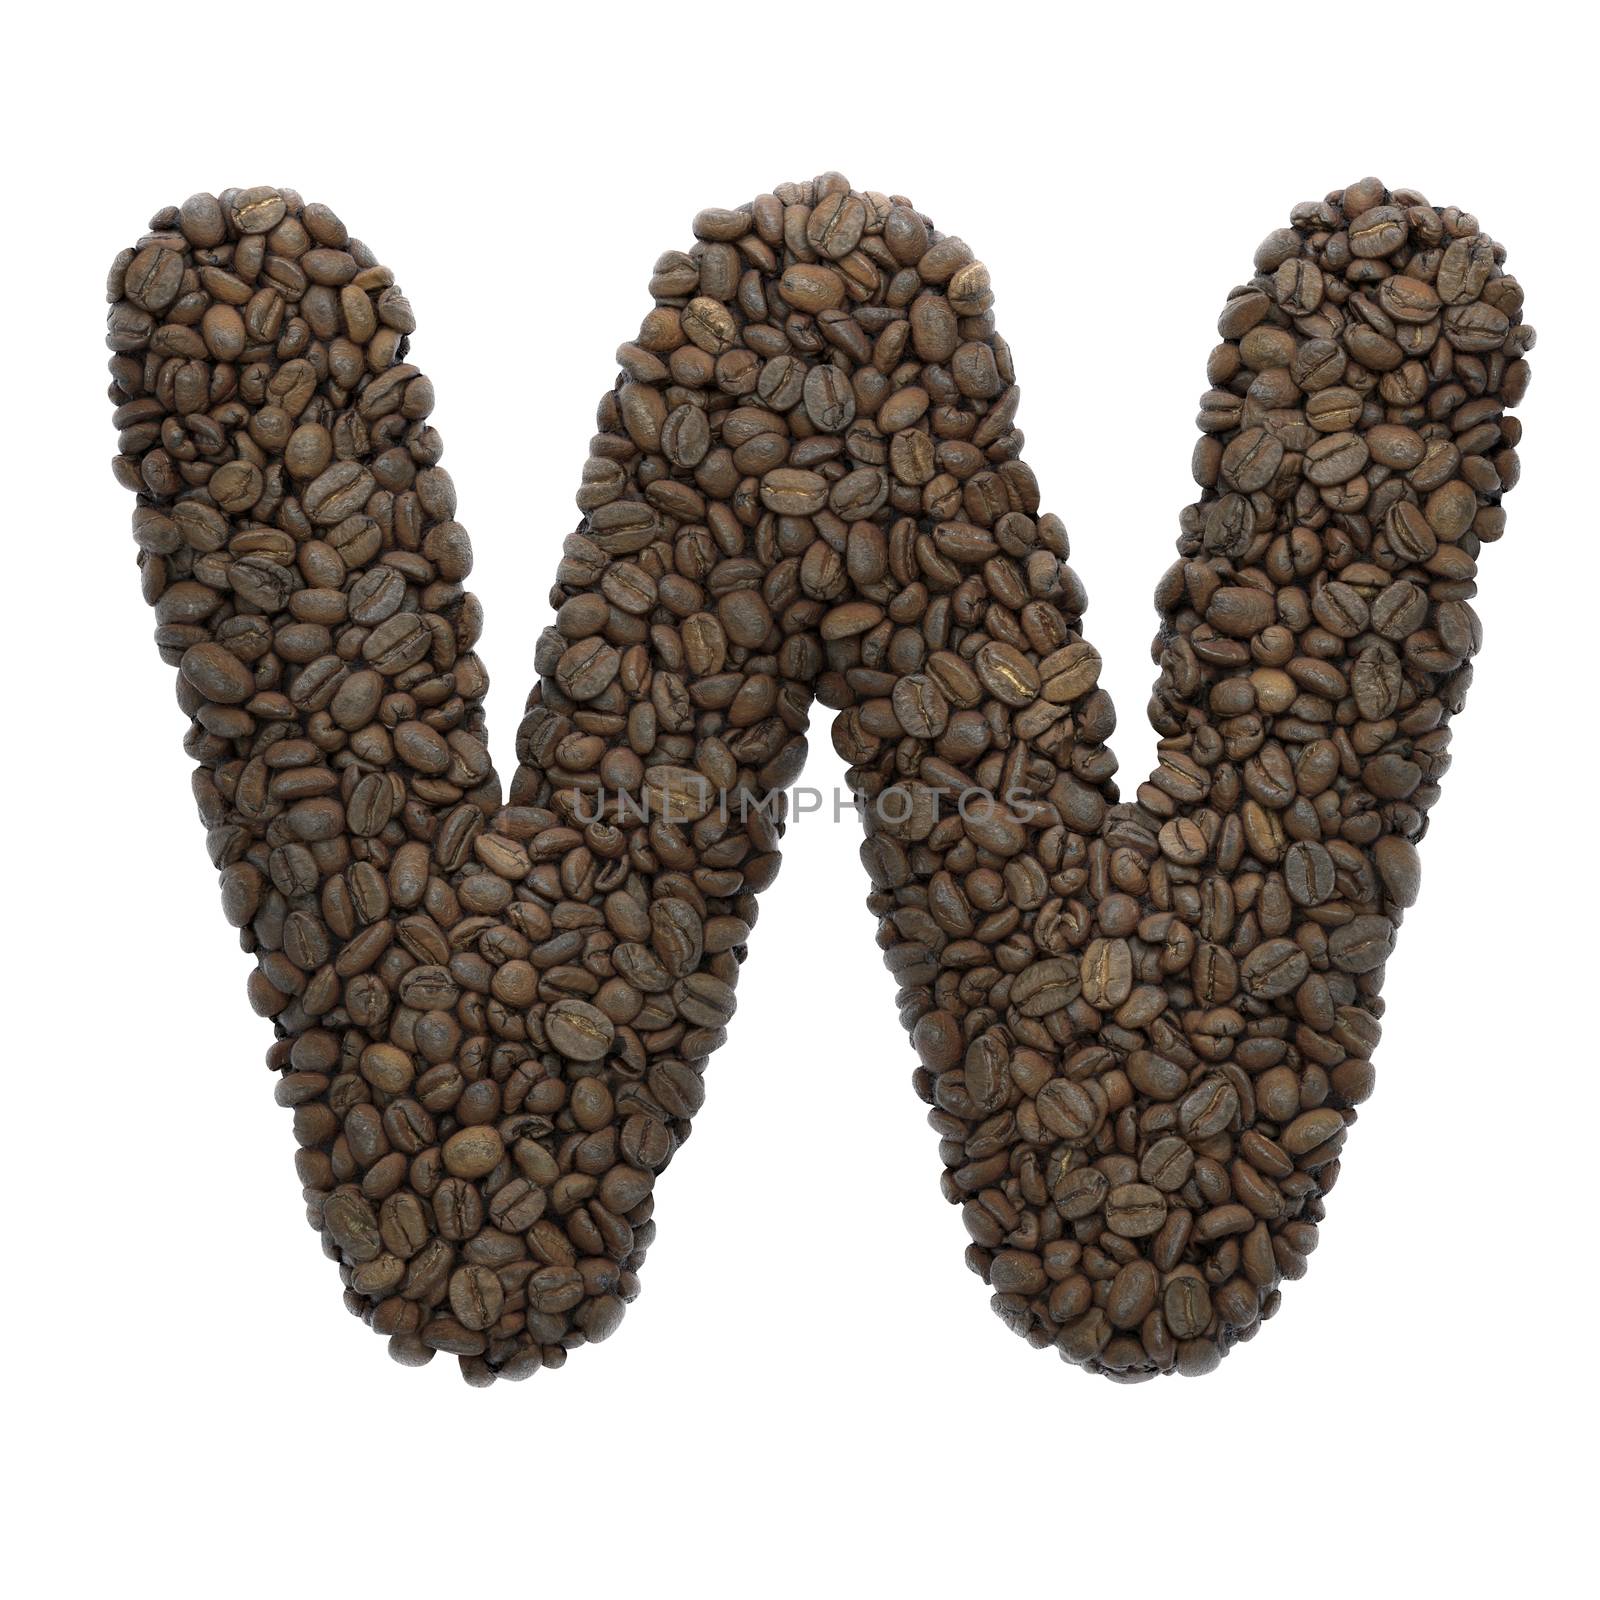 Coffee letter W - Capital 3d roasted beans font - suitable for Coffee, energy or insomnia related subjects by chrisroll